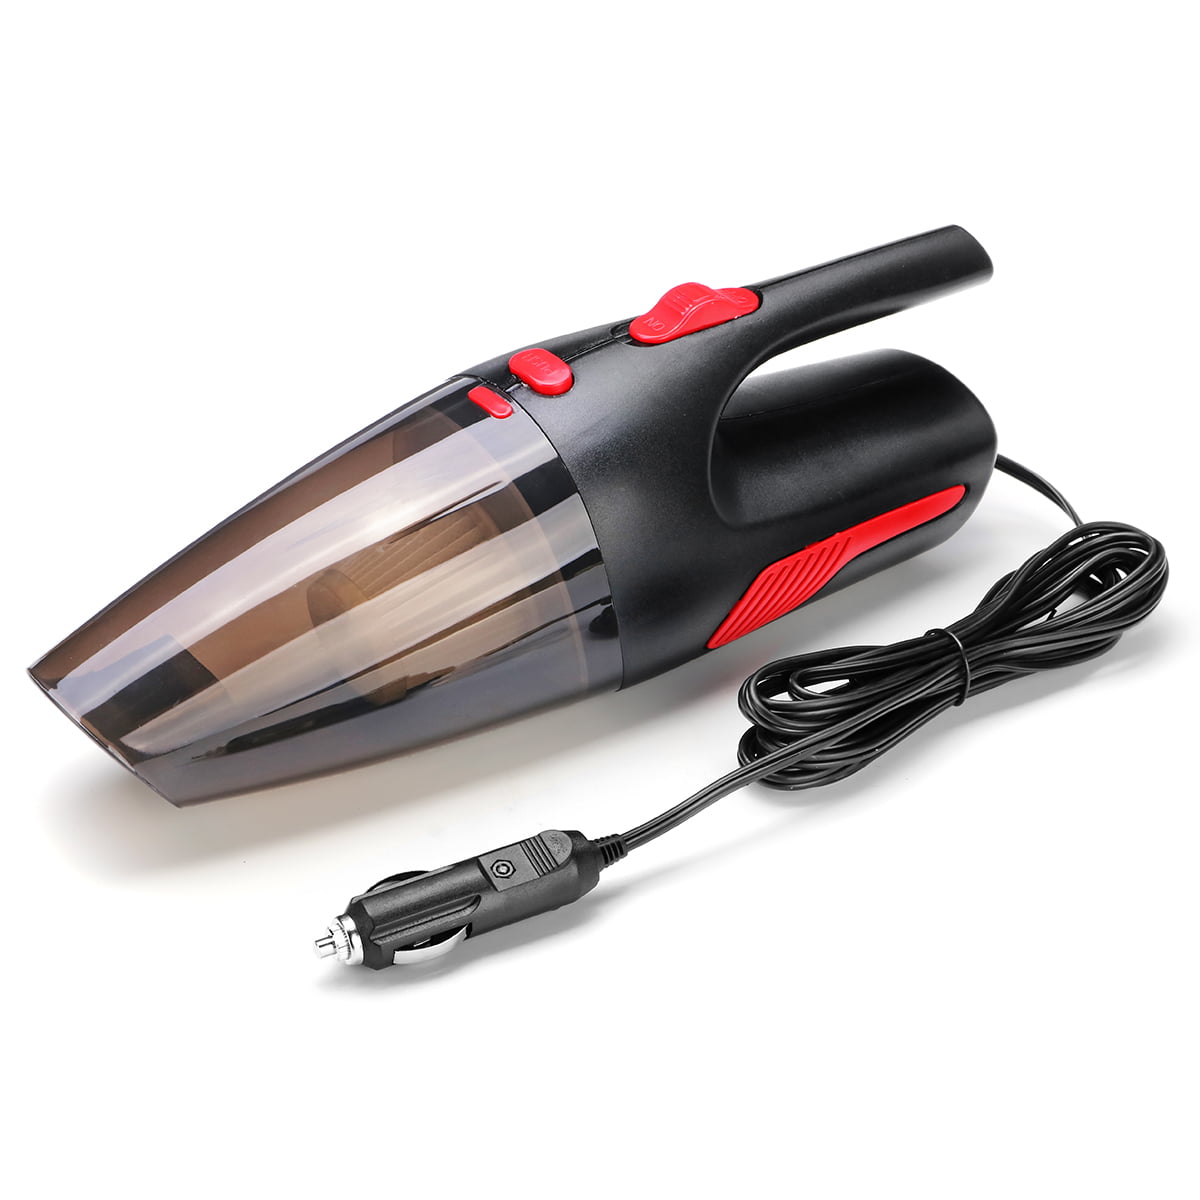 LEISURE DIRECT 12v Car Van Vacuum Cleaner Wet Dry Suction Powerful Handheld Dust Cleaning 100W